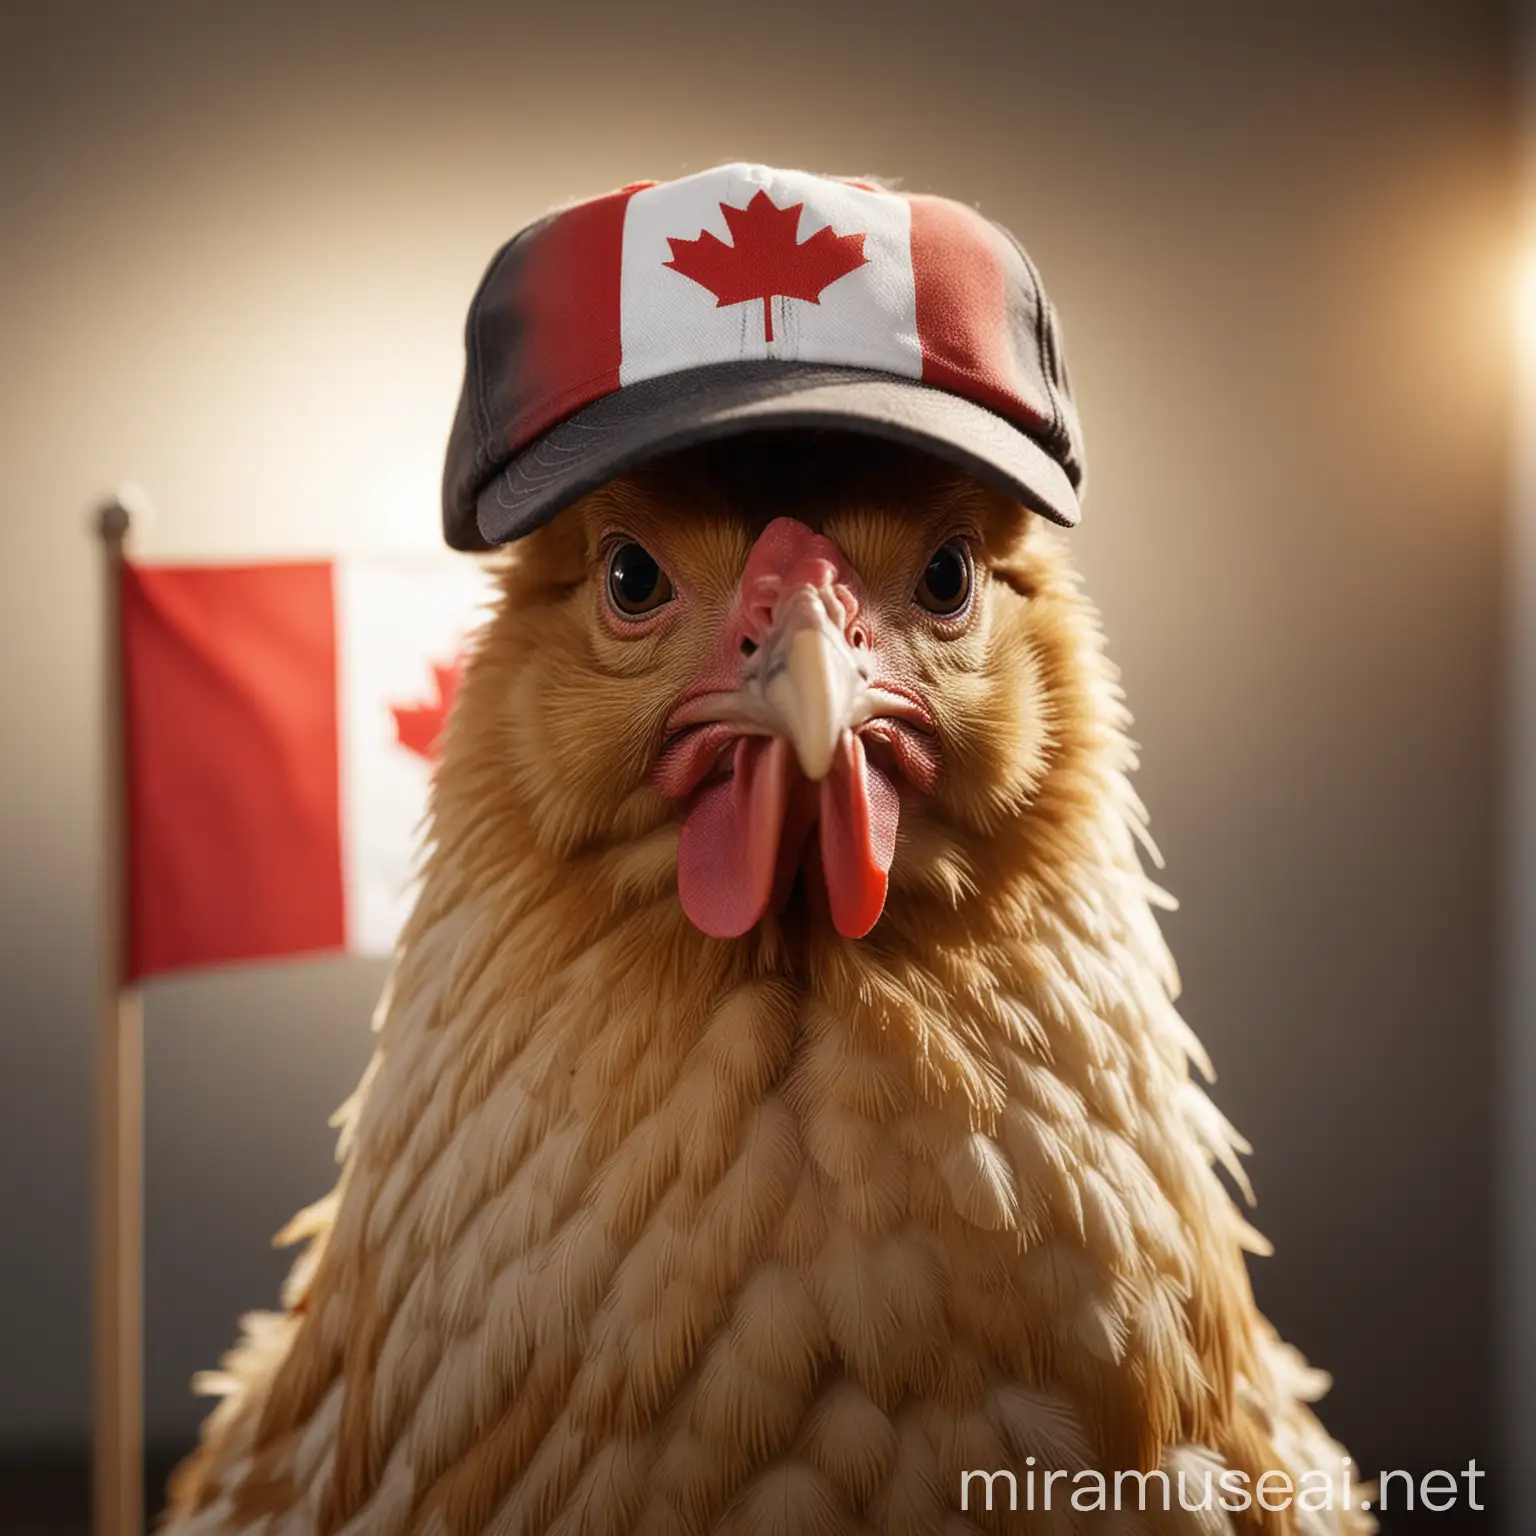 a chicken with a canadian flag on a small baseball cap, looking directly into the camera, blurry light background